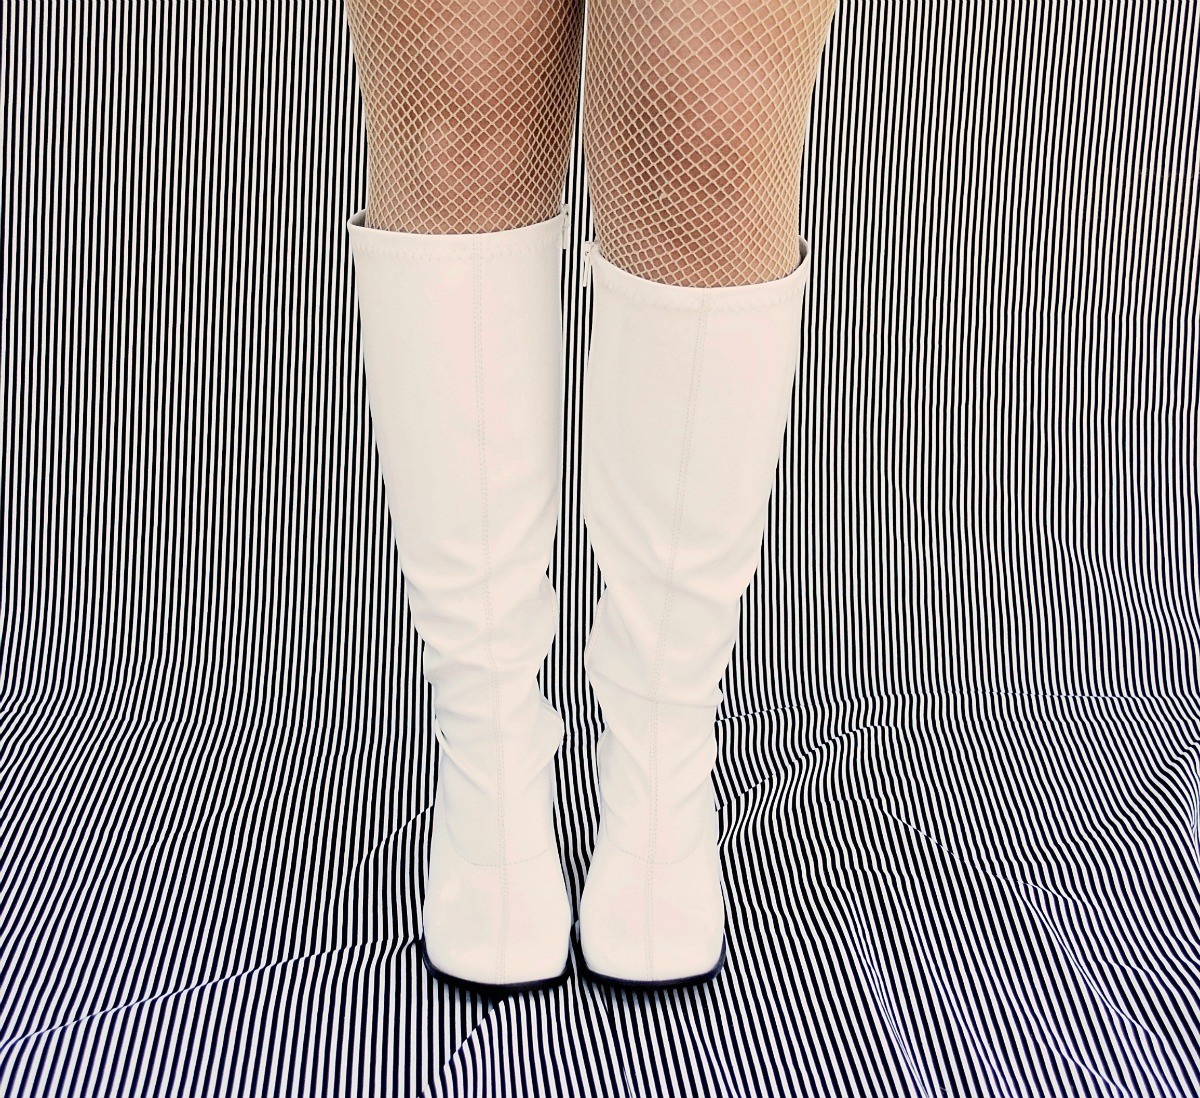 Finding GoGo Boots for a Dance Team 